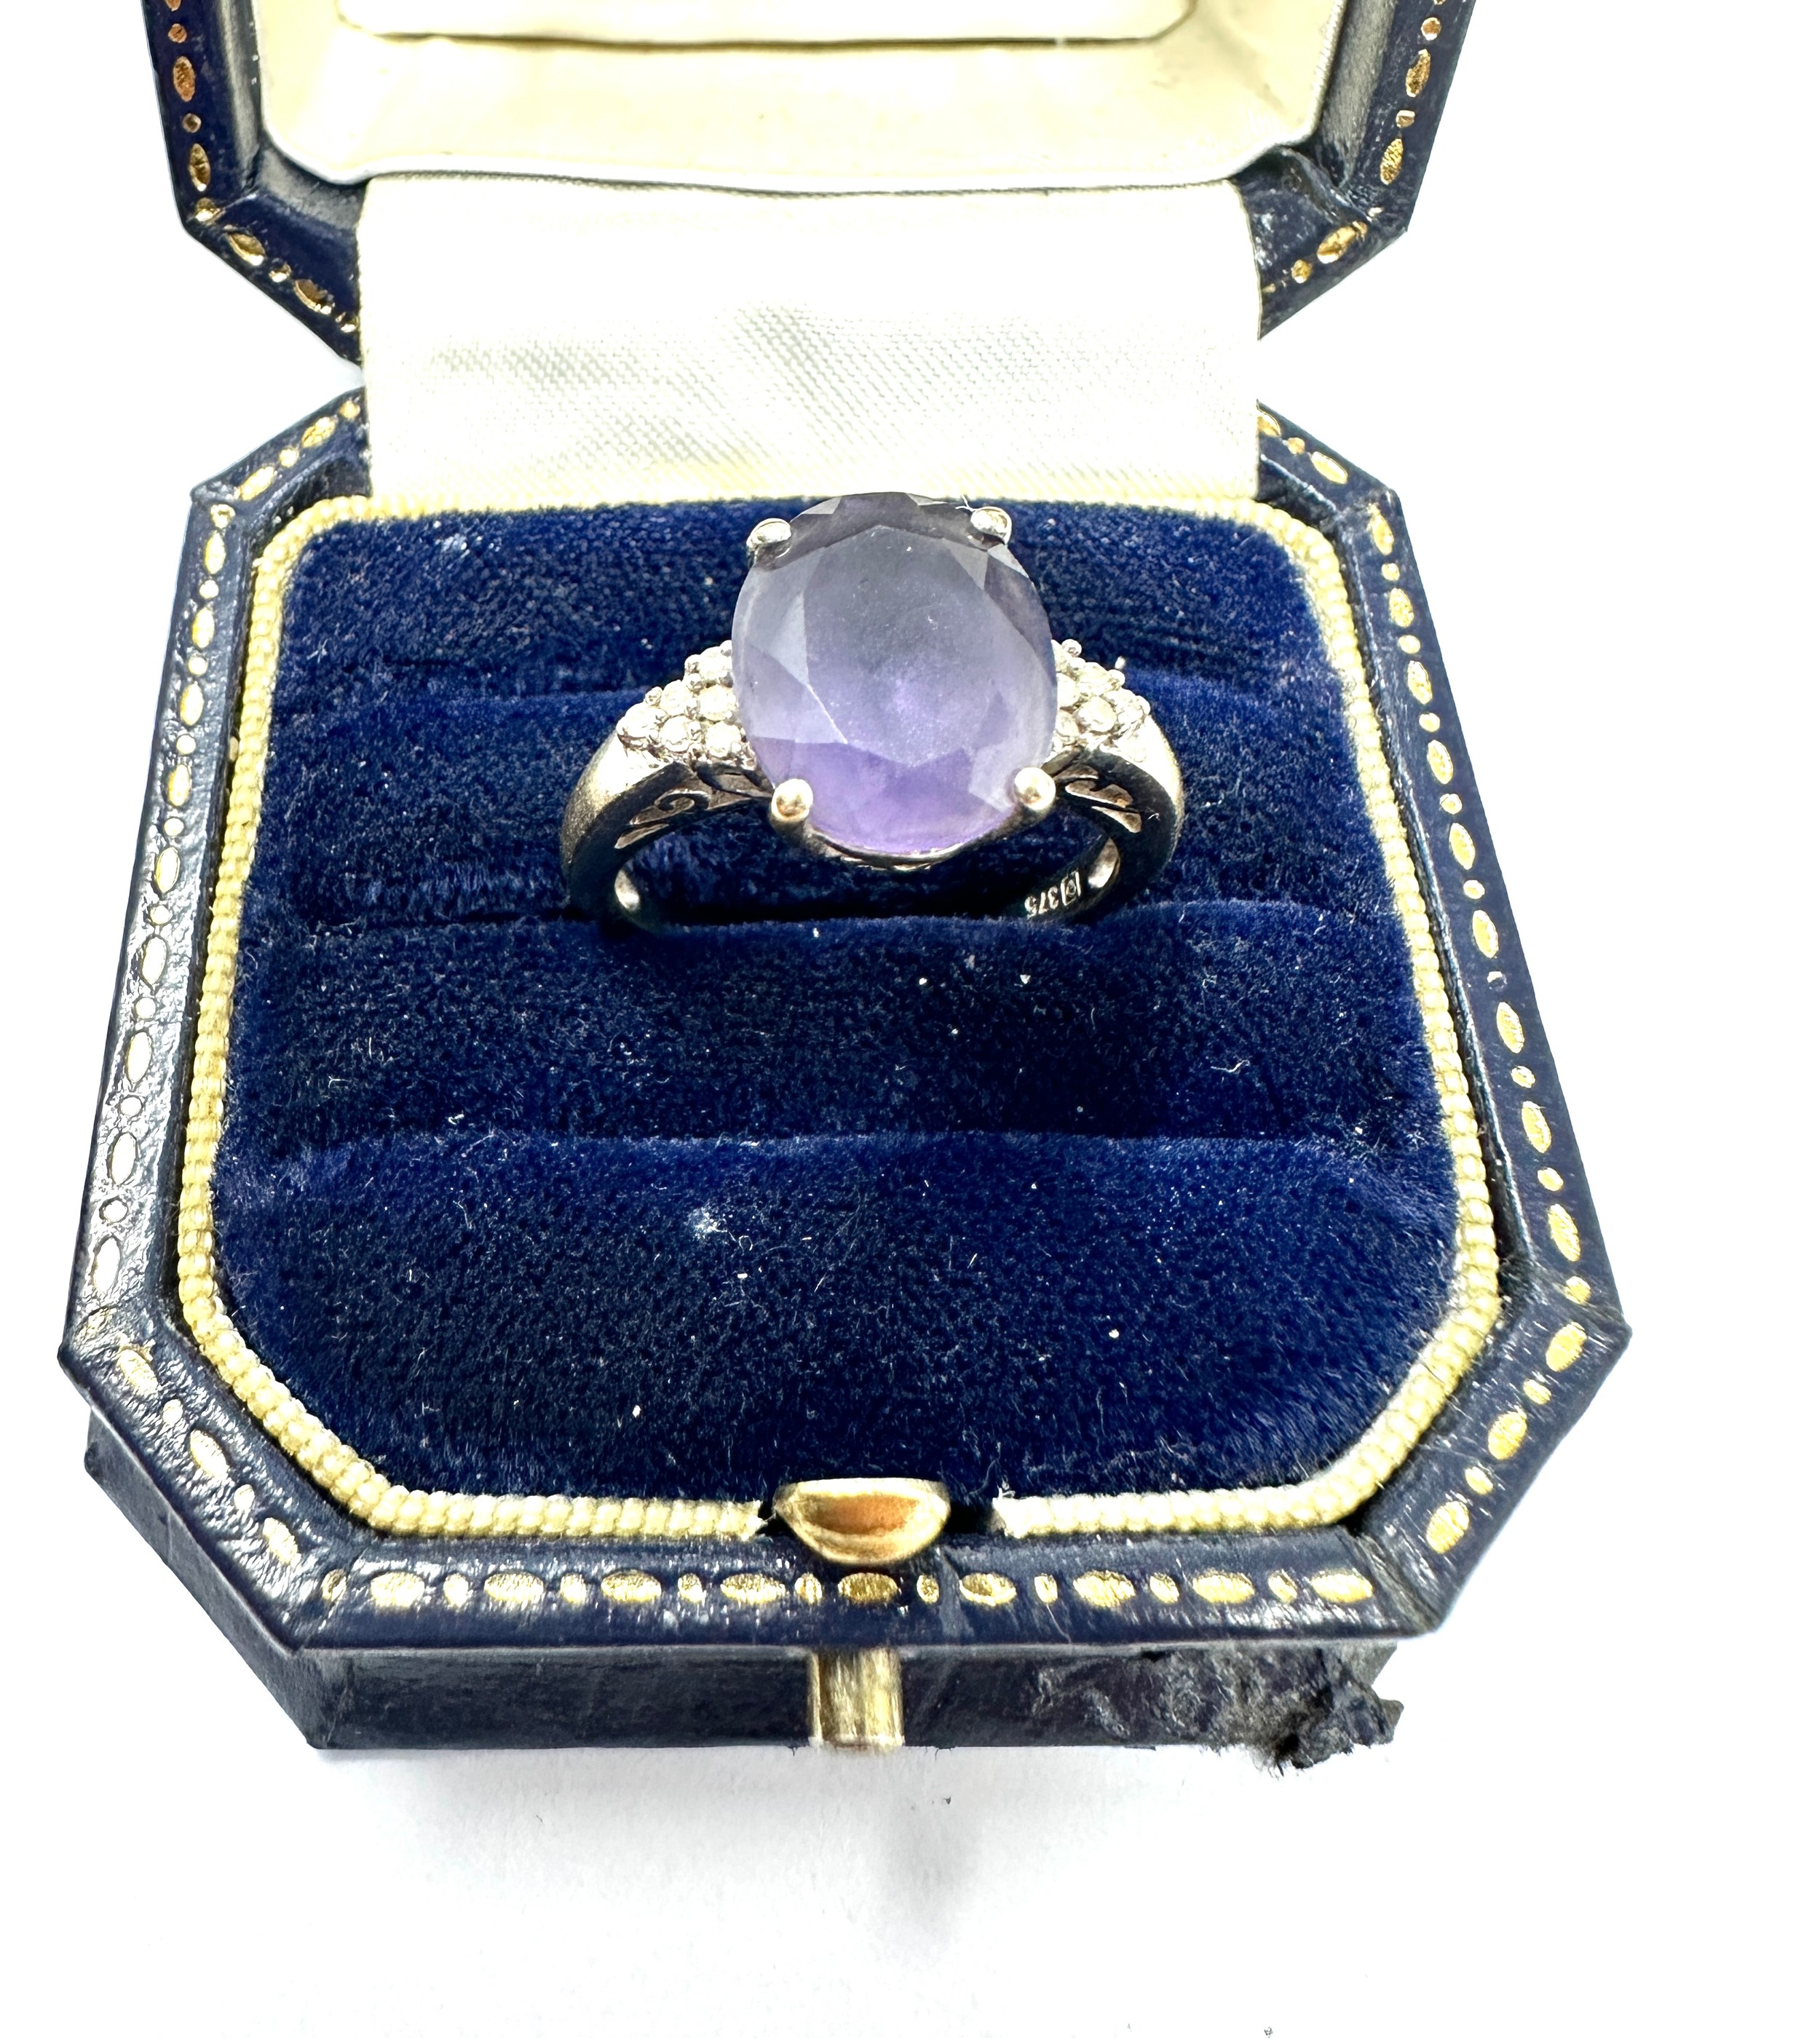 9ct white gold diamond and amethyst ring (3.6g)